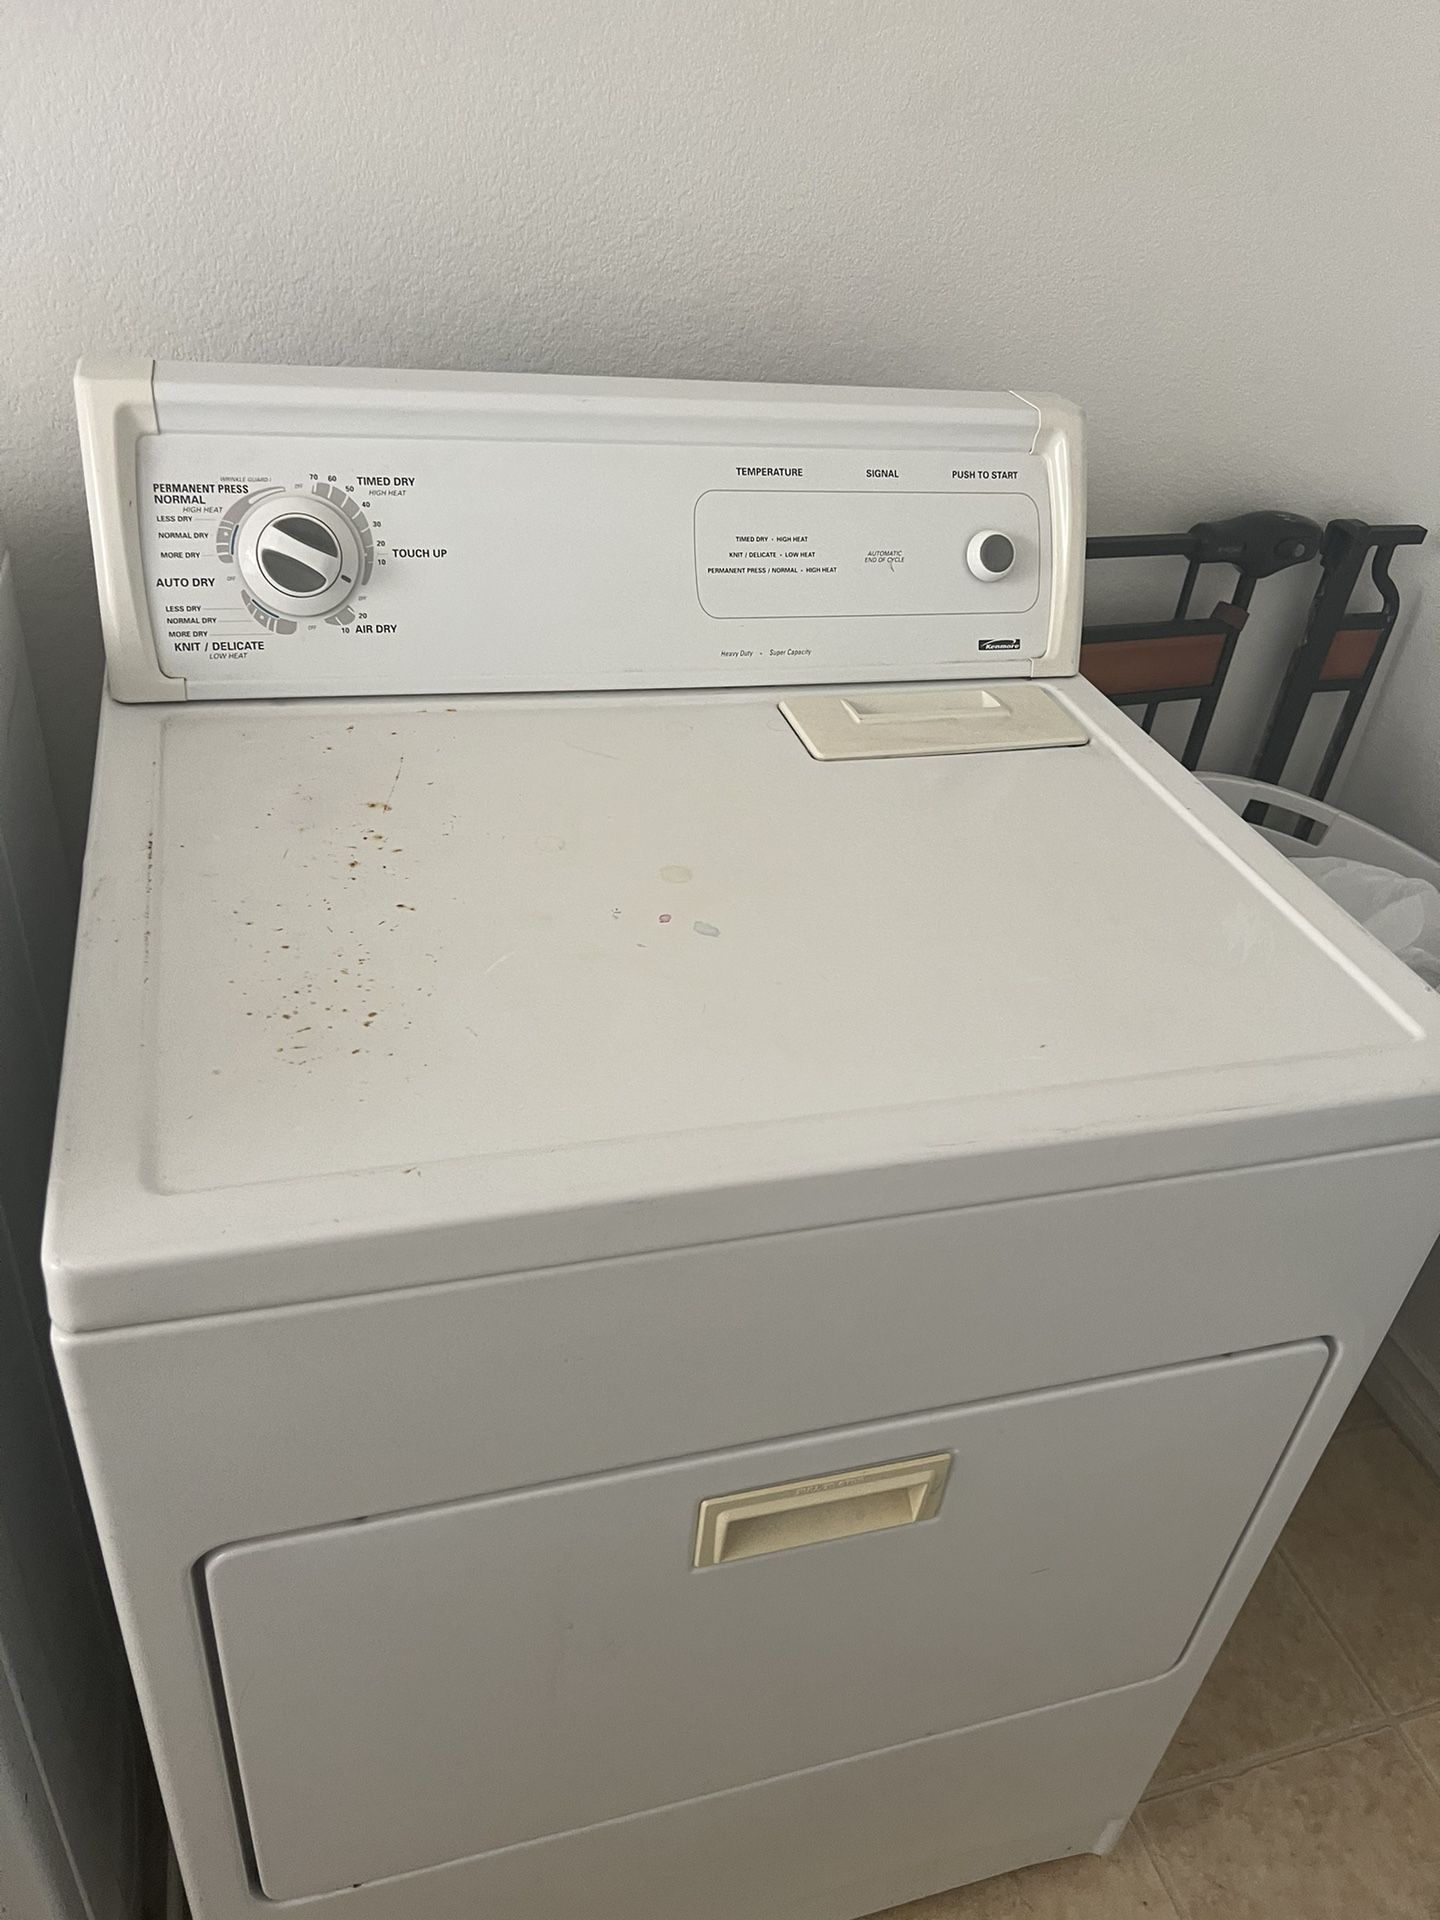 Washer and dryer working good